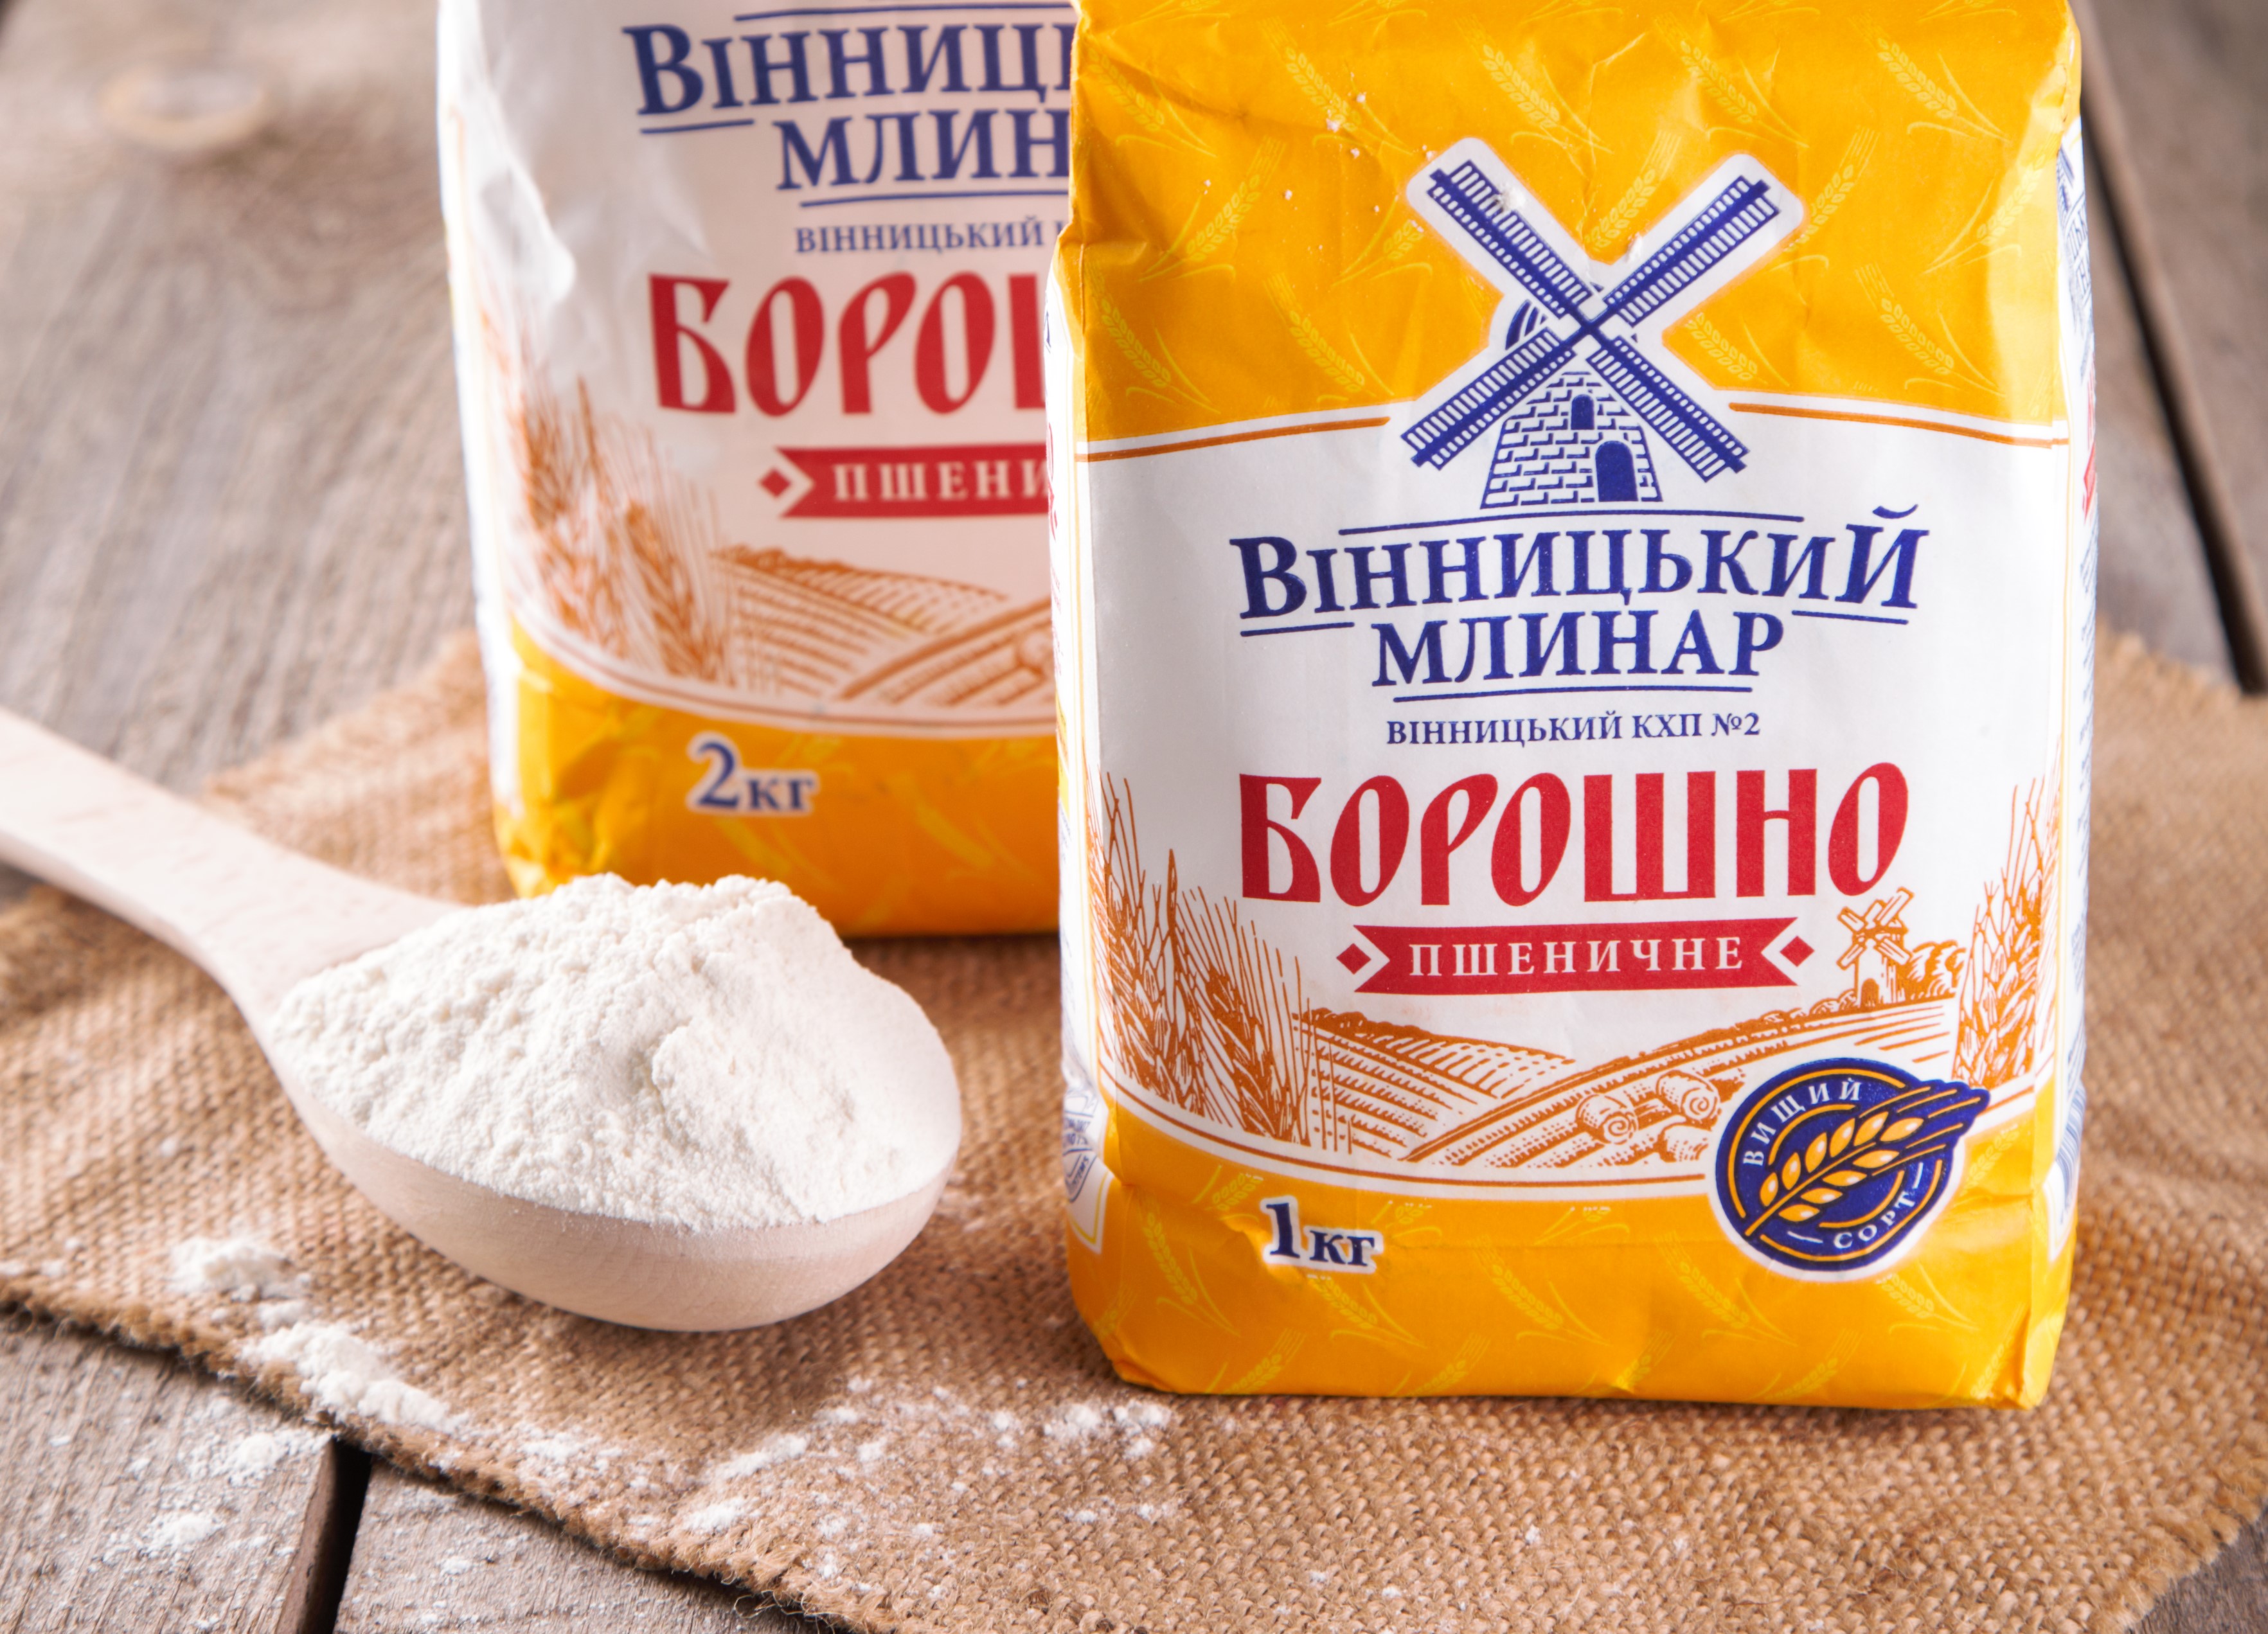 UPI-AGRO again became a domestic leader in the production and export of flour